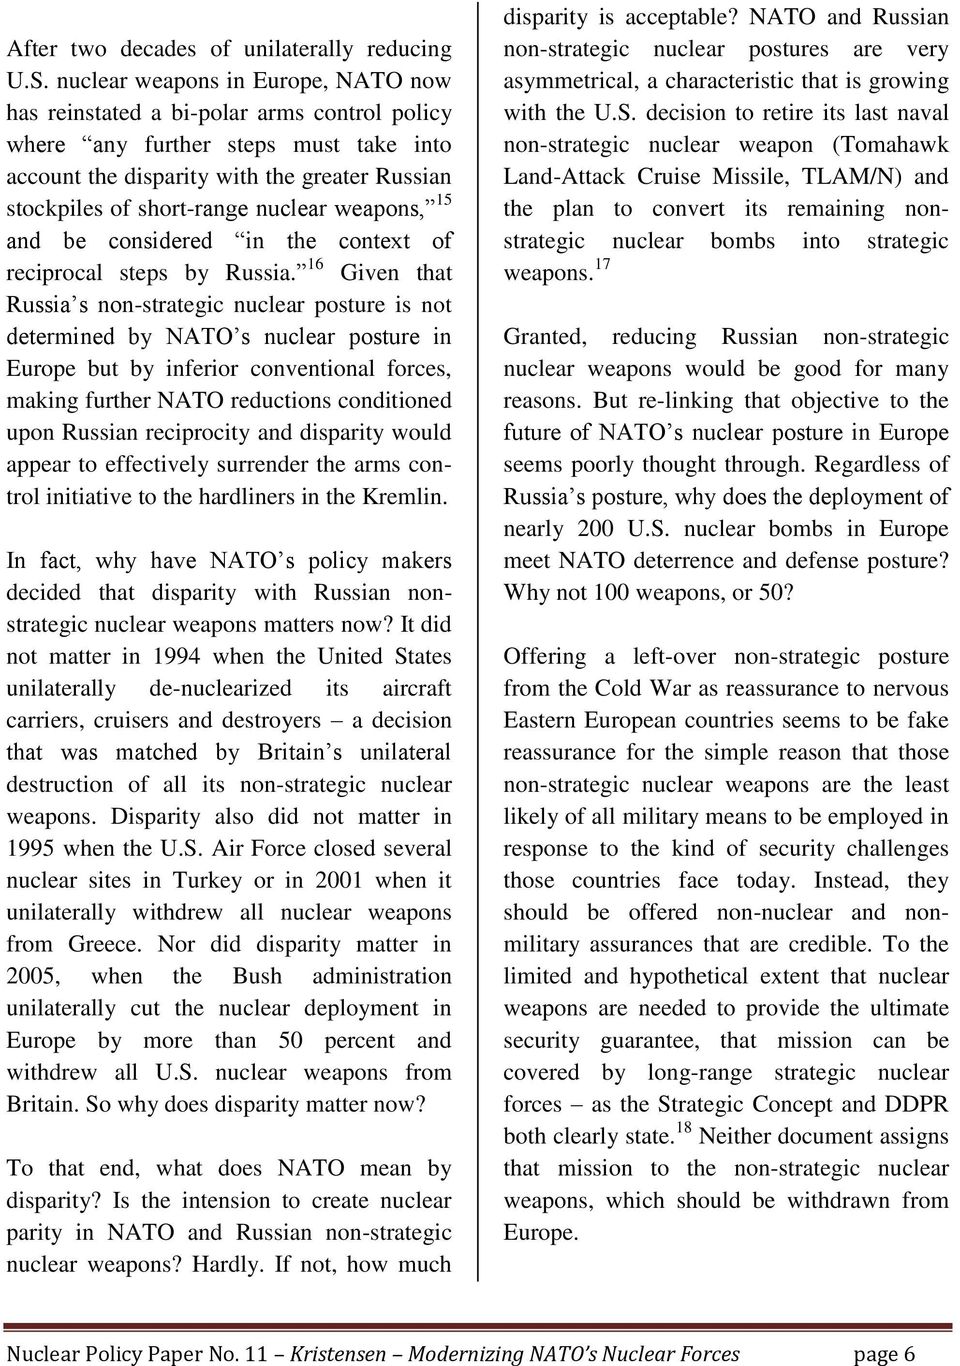 nuclear weapons, 15 and be considered in the context of reciprocal steps by Russia.